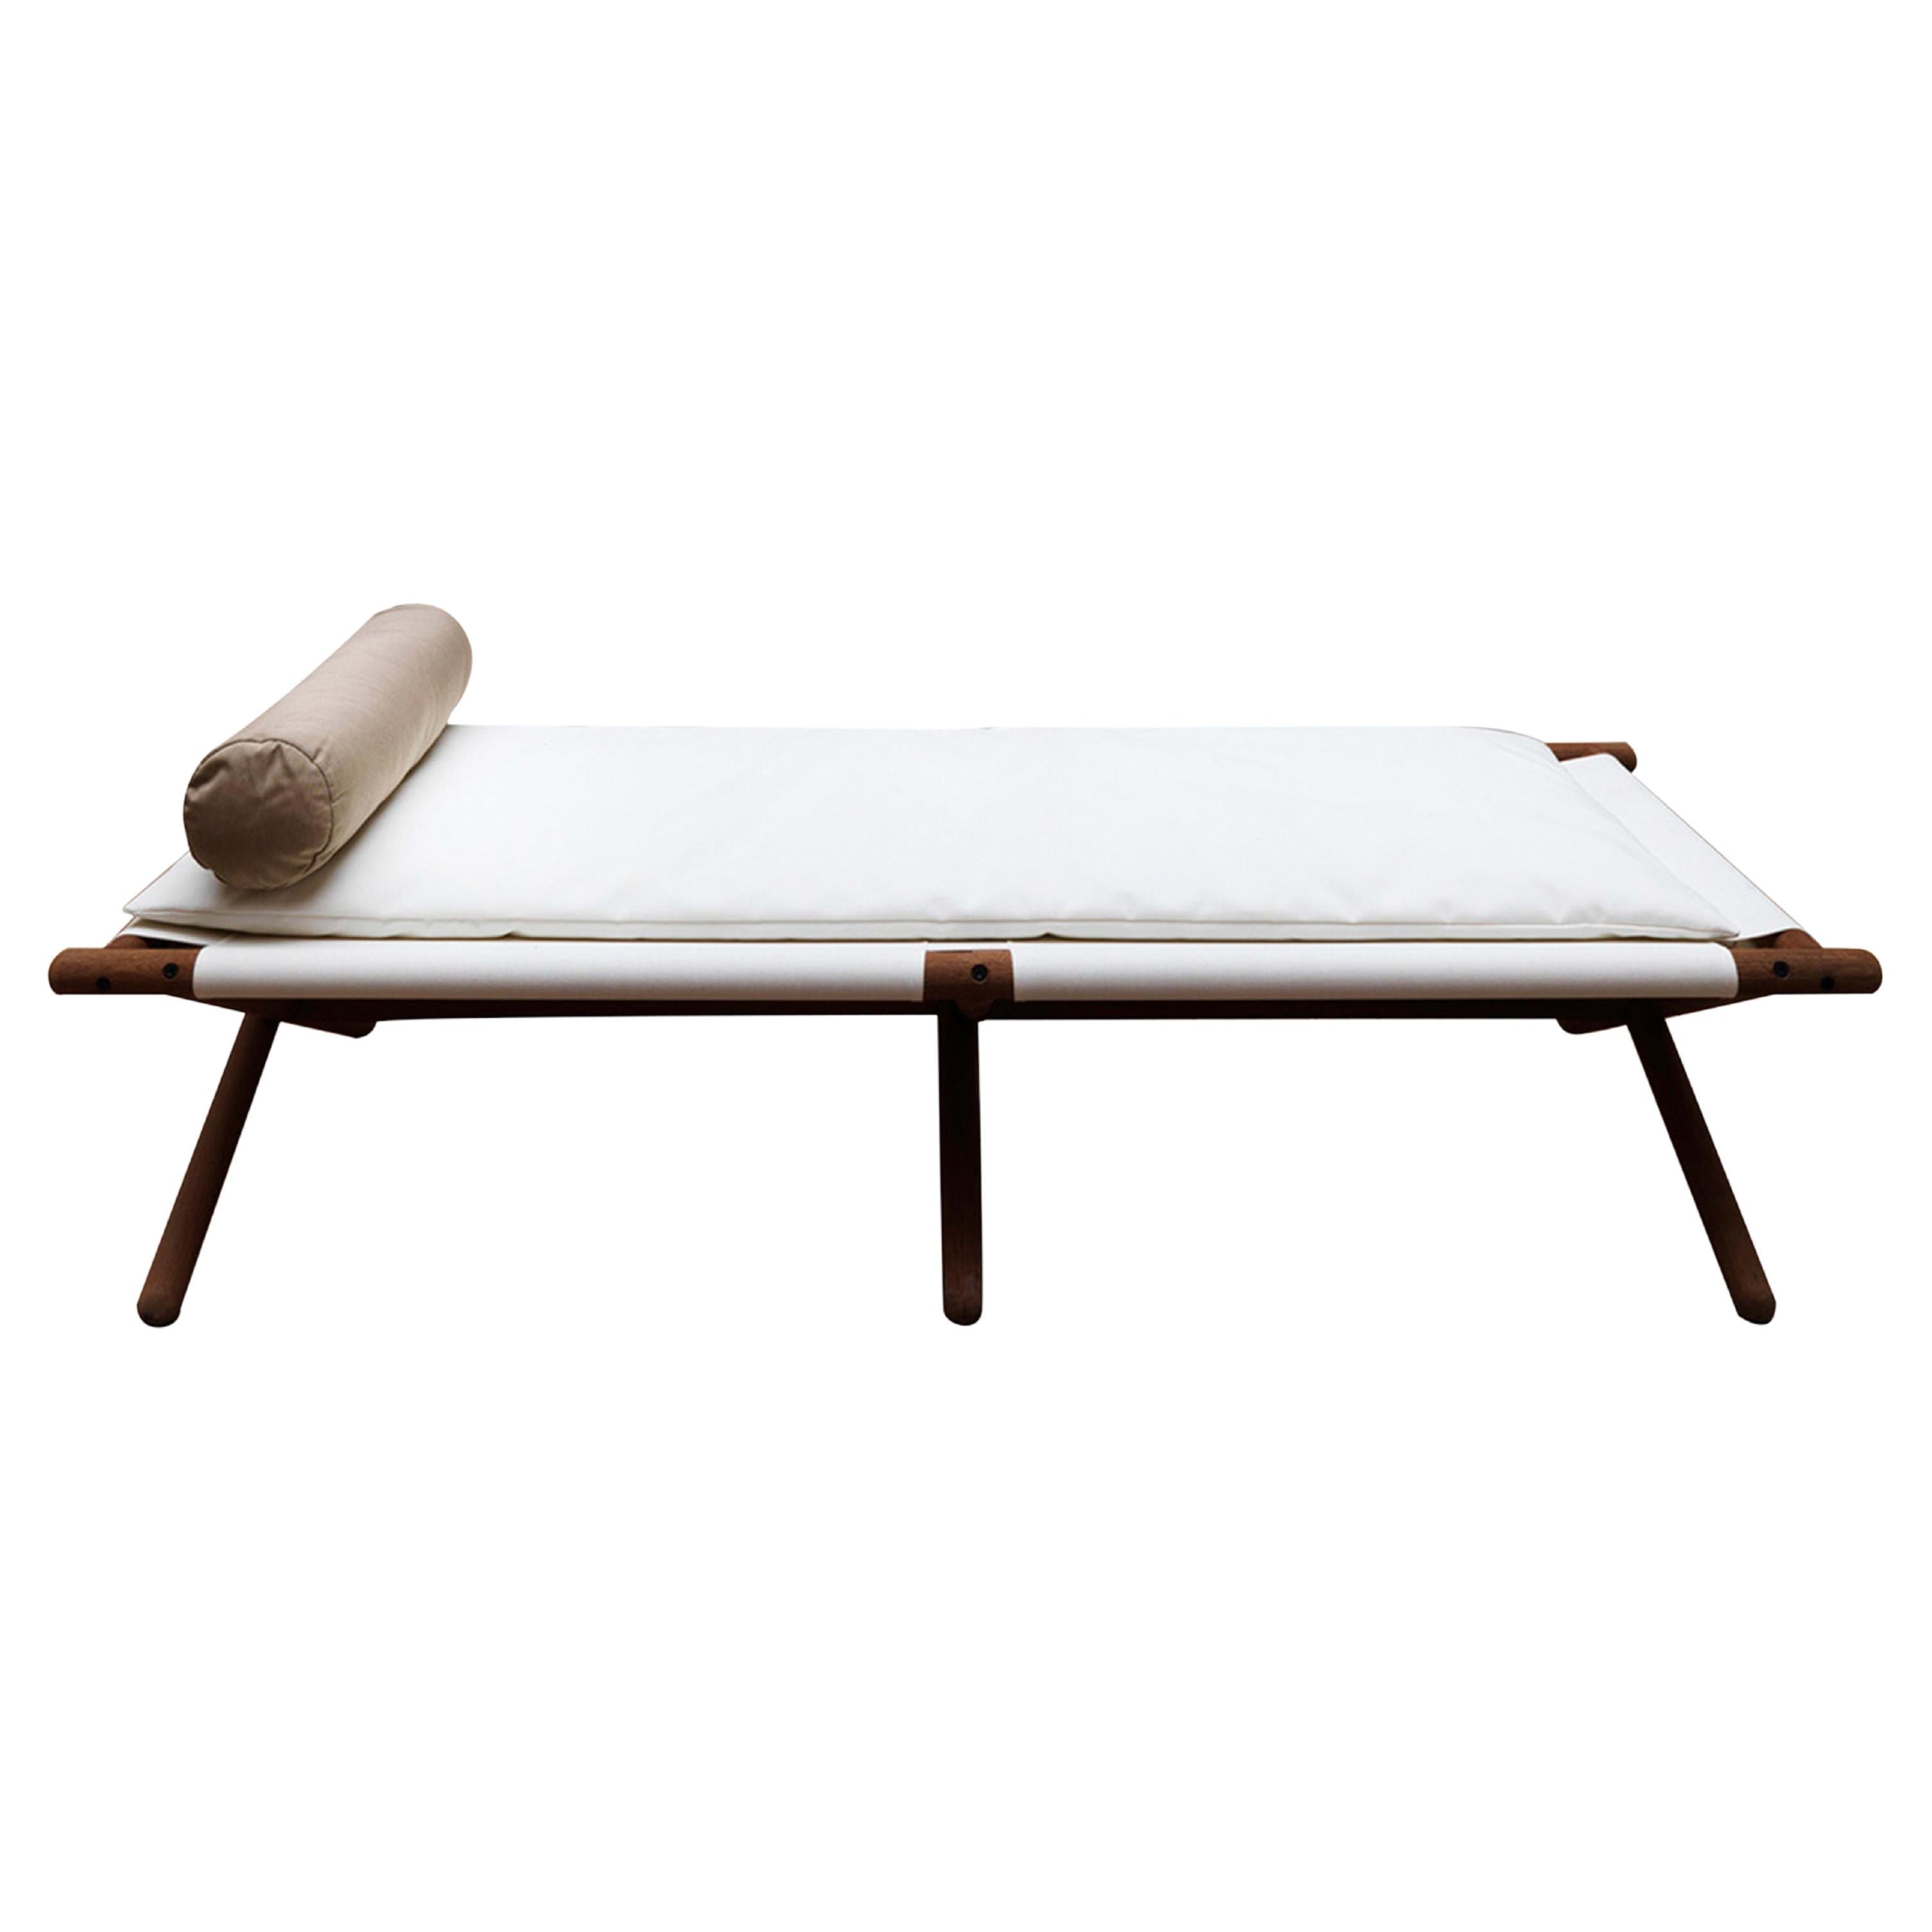 Paraggi Camp Bed by Ludovica + Roberto Palomba For Sale